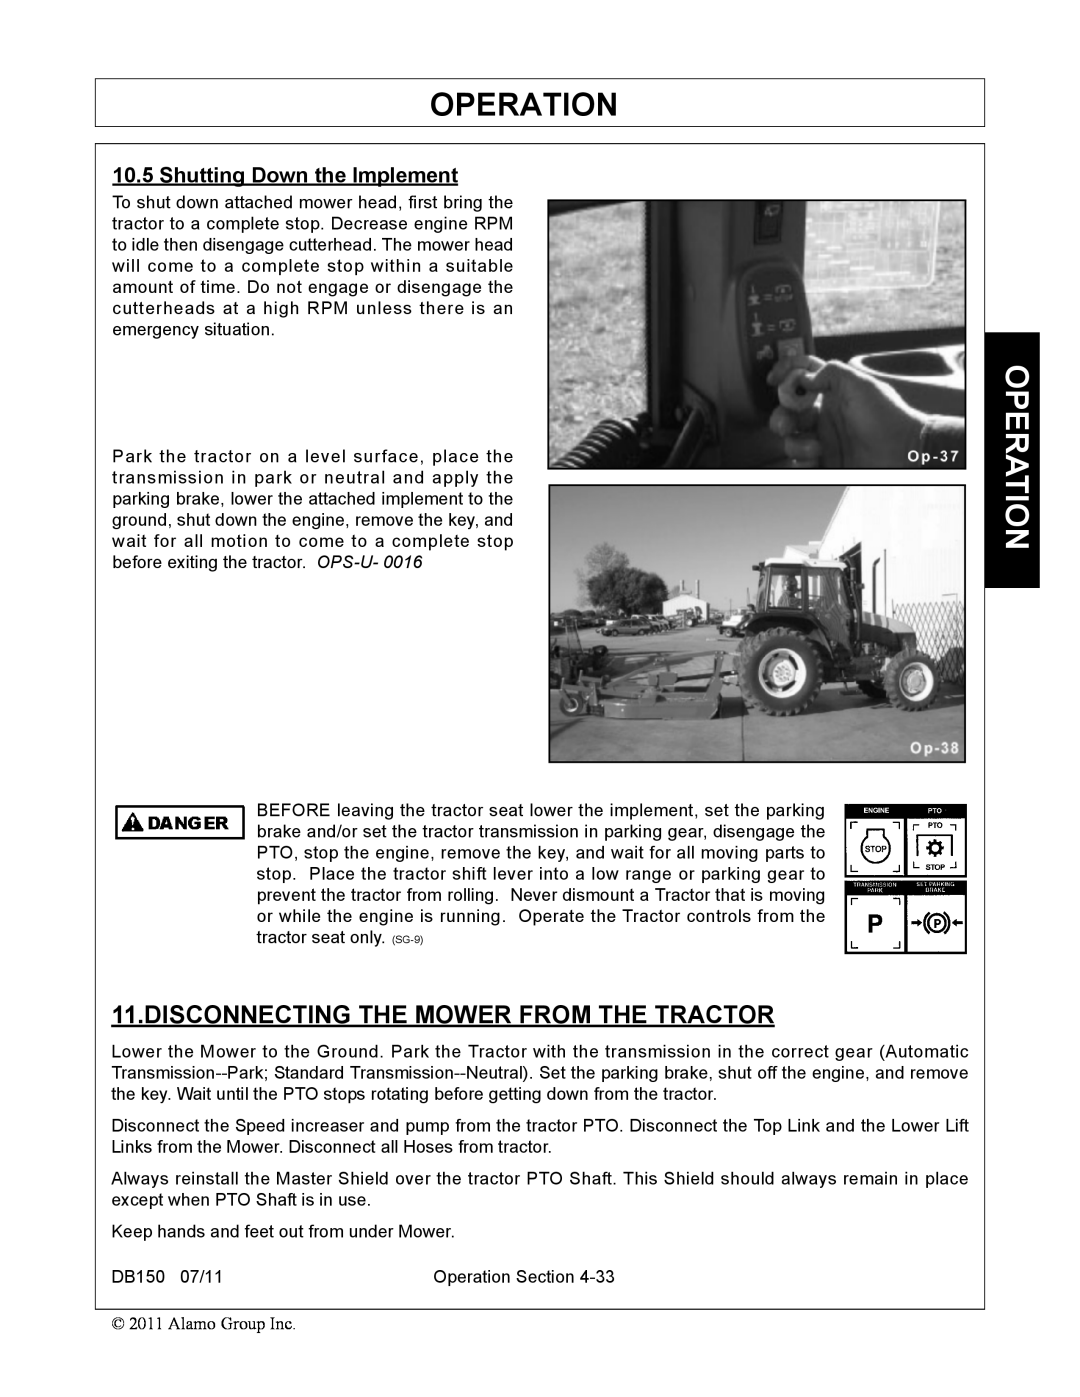 Rhino Mounts DB150 manual Disconnecting The Mower From The Tractor, Operation, Shutting Down the Implement 